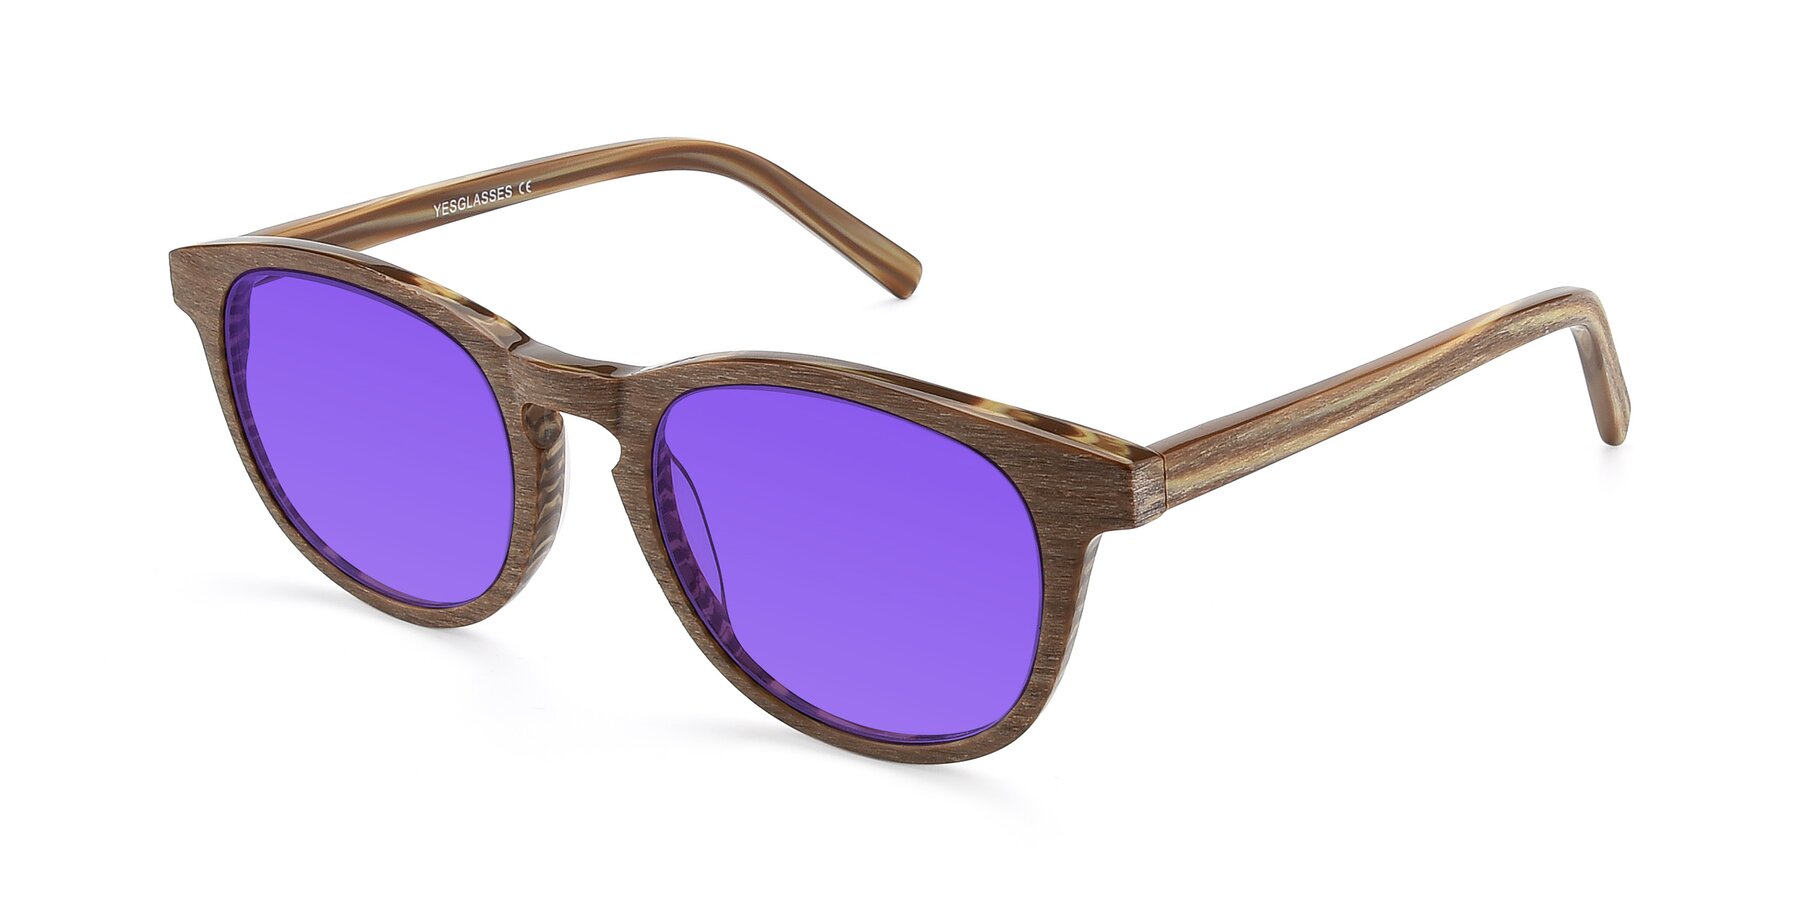 Angle of SR6044 in Brown-Wooden with Purple Tinted Lenses